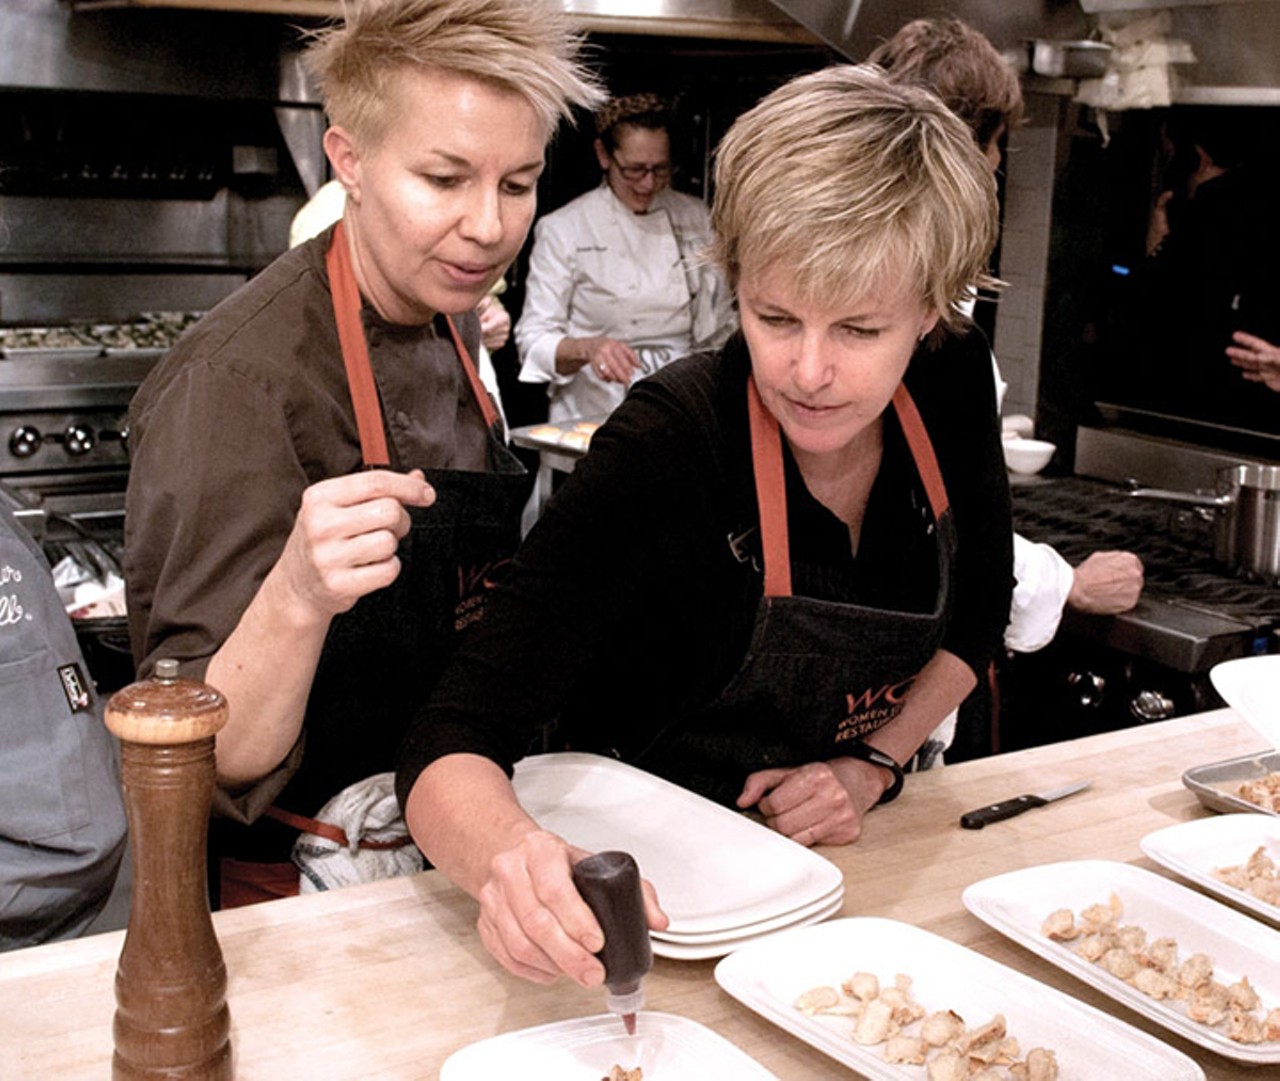 Sunday, March 18Women in the Kitchen: Legends, Mentors and Friends at Lake Meadow Naturals